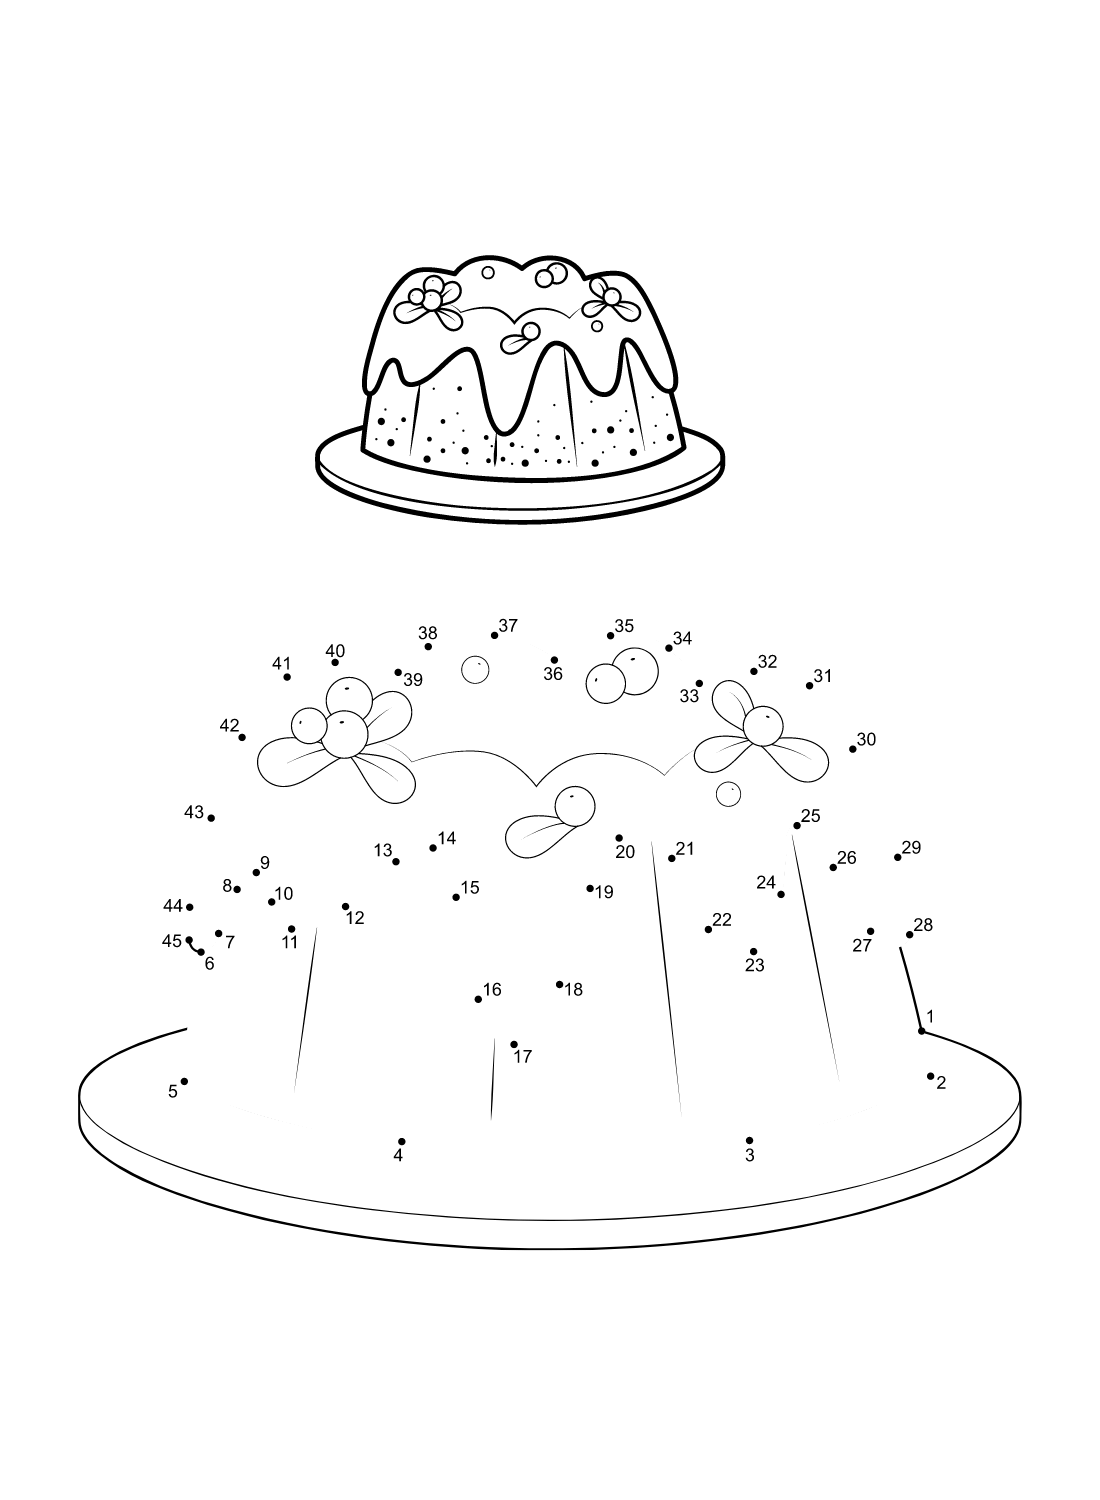 dot-to-dot-cake-coloring-pages-free-printable-coloring-pages